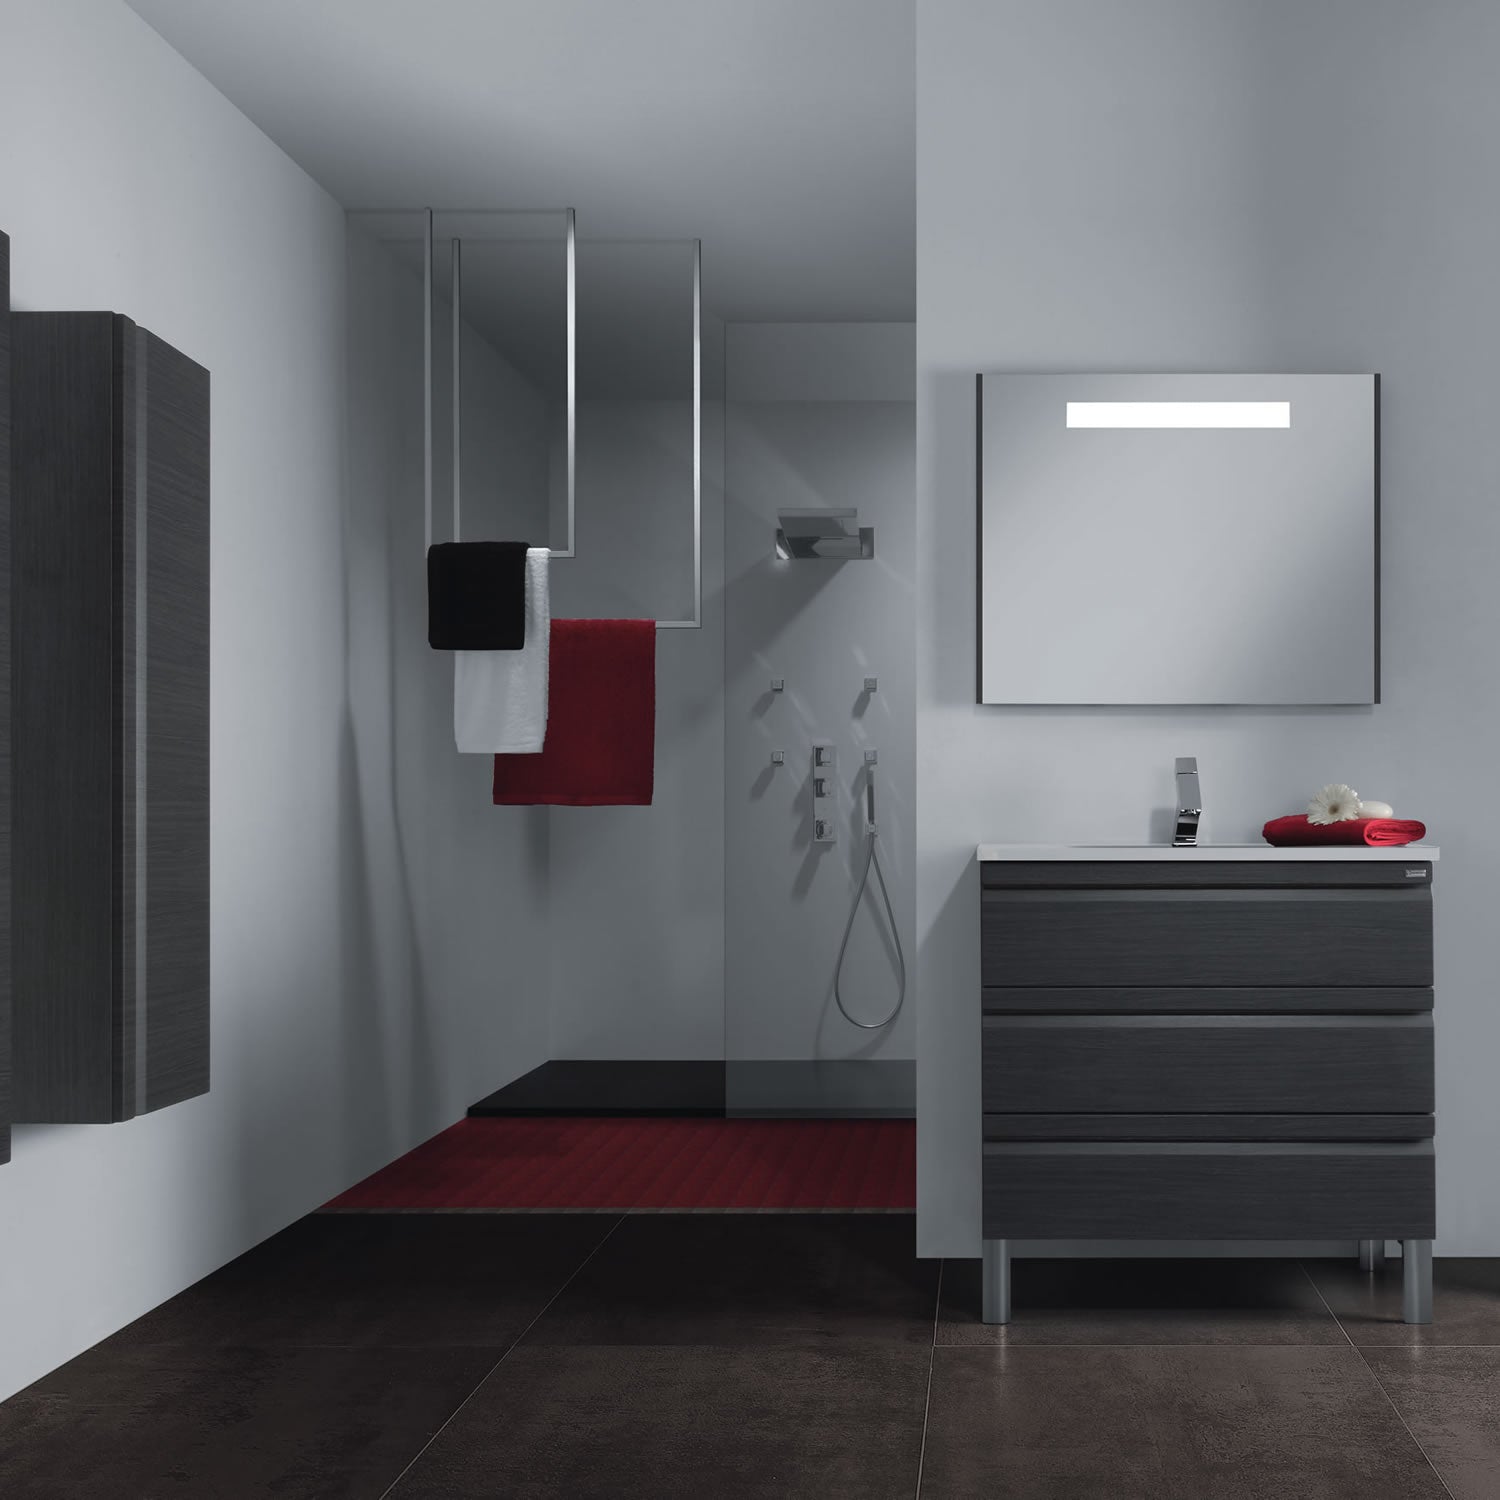 40" Single Vanity, Floor Mount, 3 Drawers with Soft Close, Grey, Serie Solco by VALENZUELA